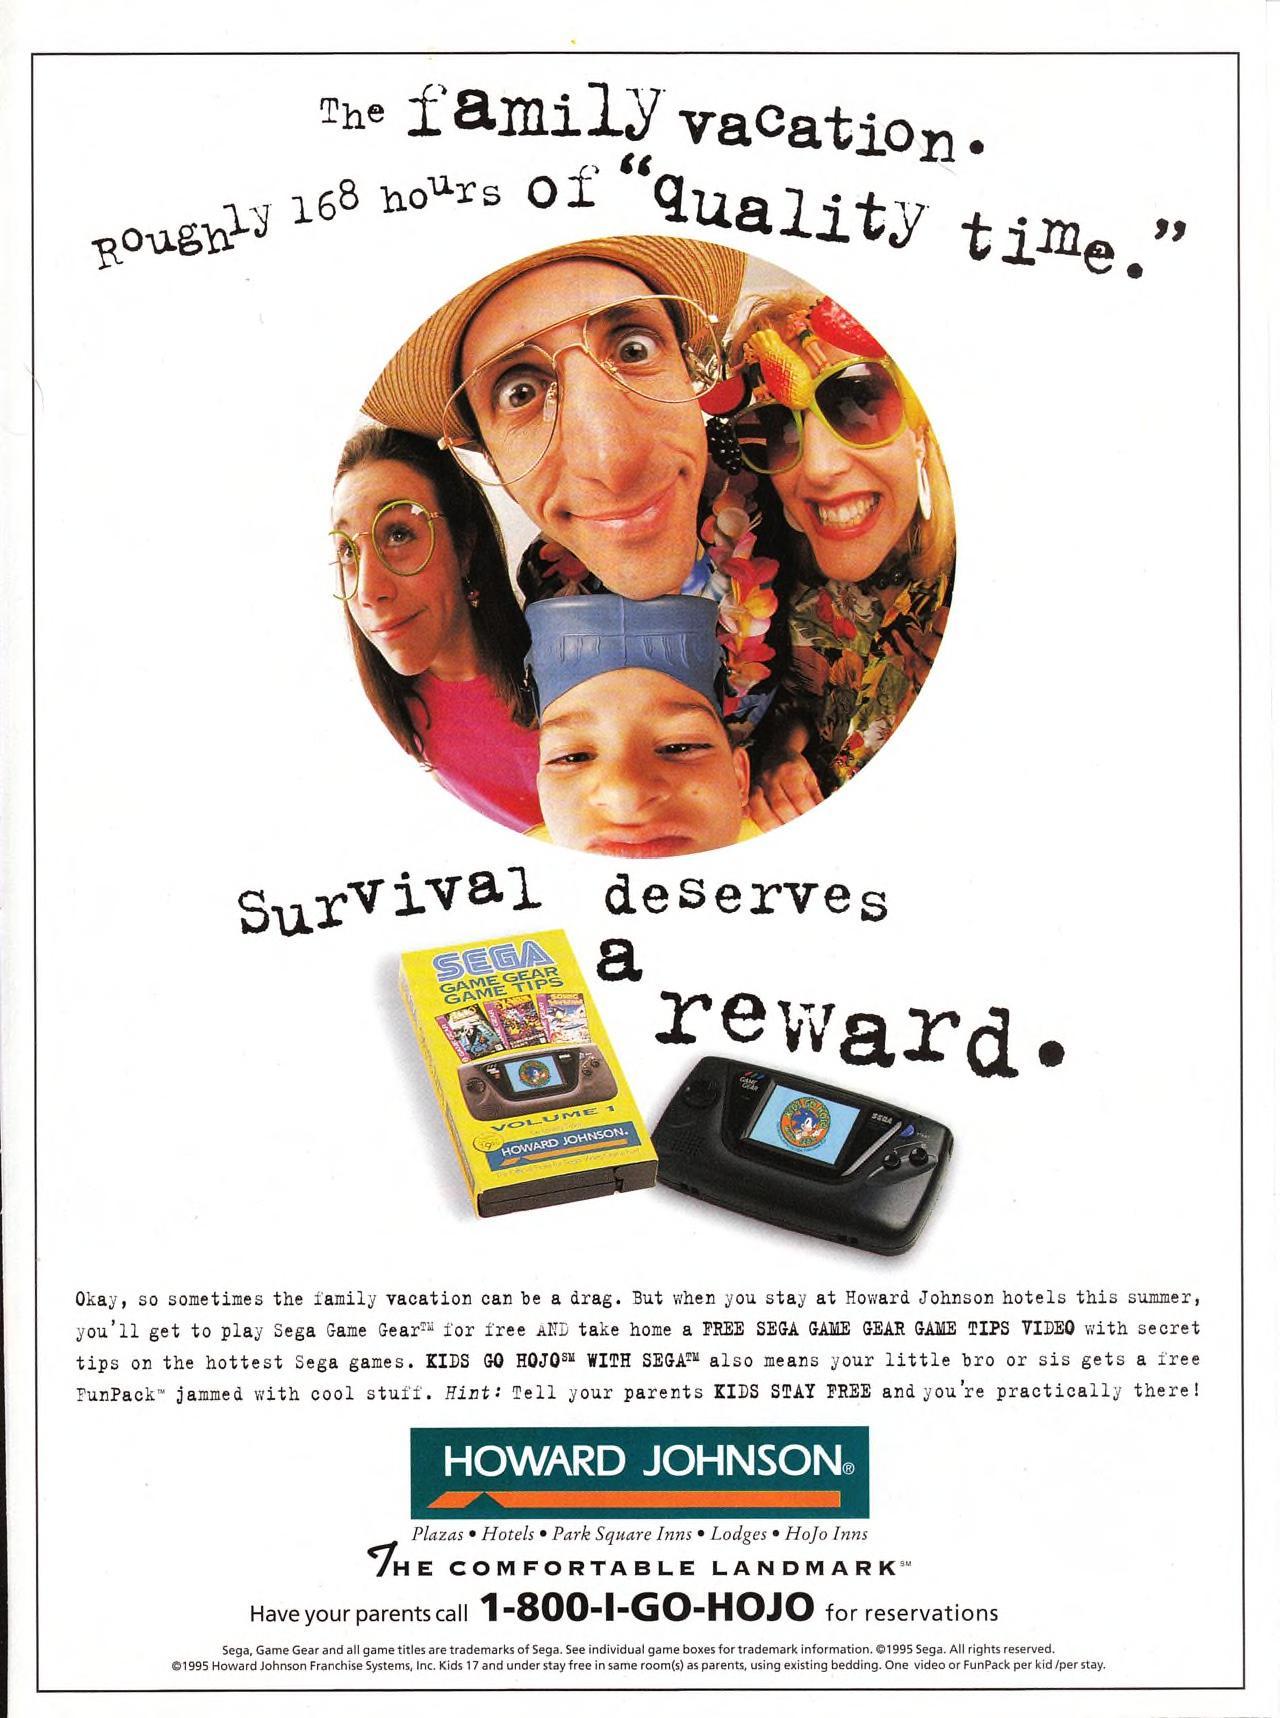 ‘Howard Johnson - “Survival Deserves a Reward”‘[MISC] [USA] [MAGAZINE] [1995]
• Sega Vision, May 1995
• Scanned by Jason Scott, via The Internet Archive
• More ads from that unexpected deal between Sega and Howard Johnson!